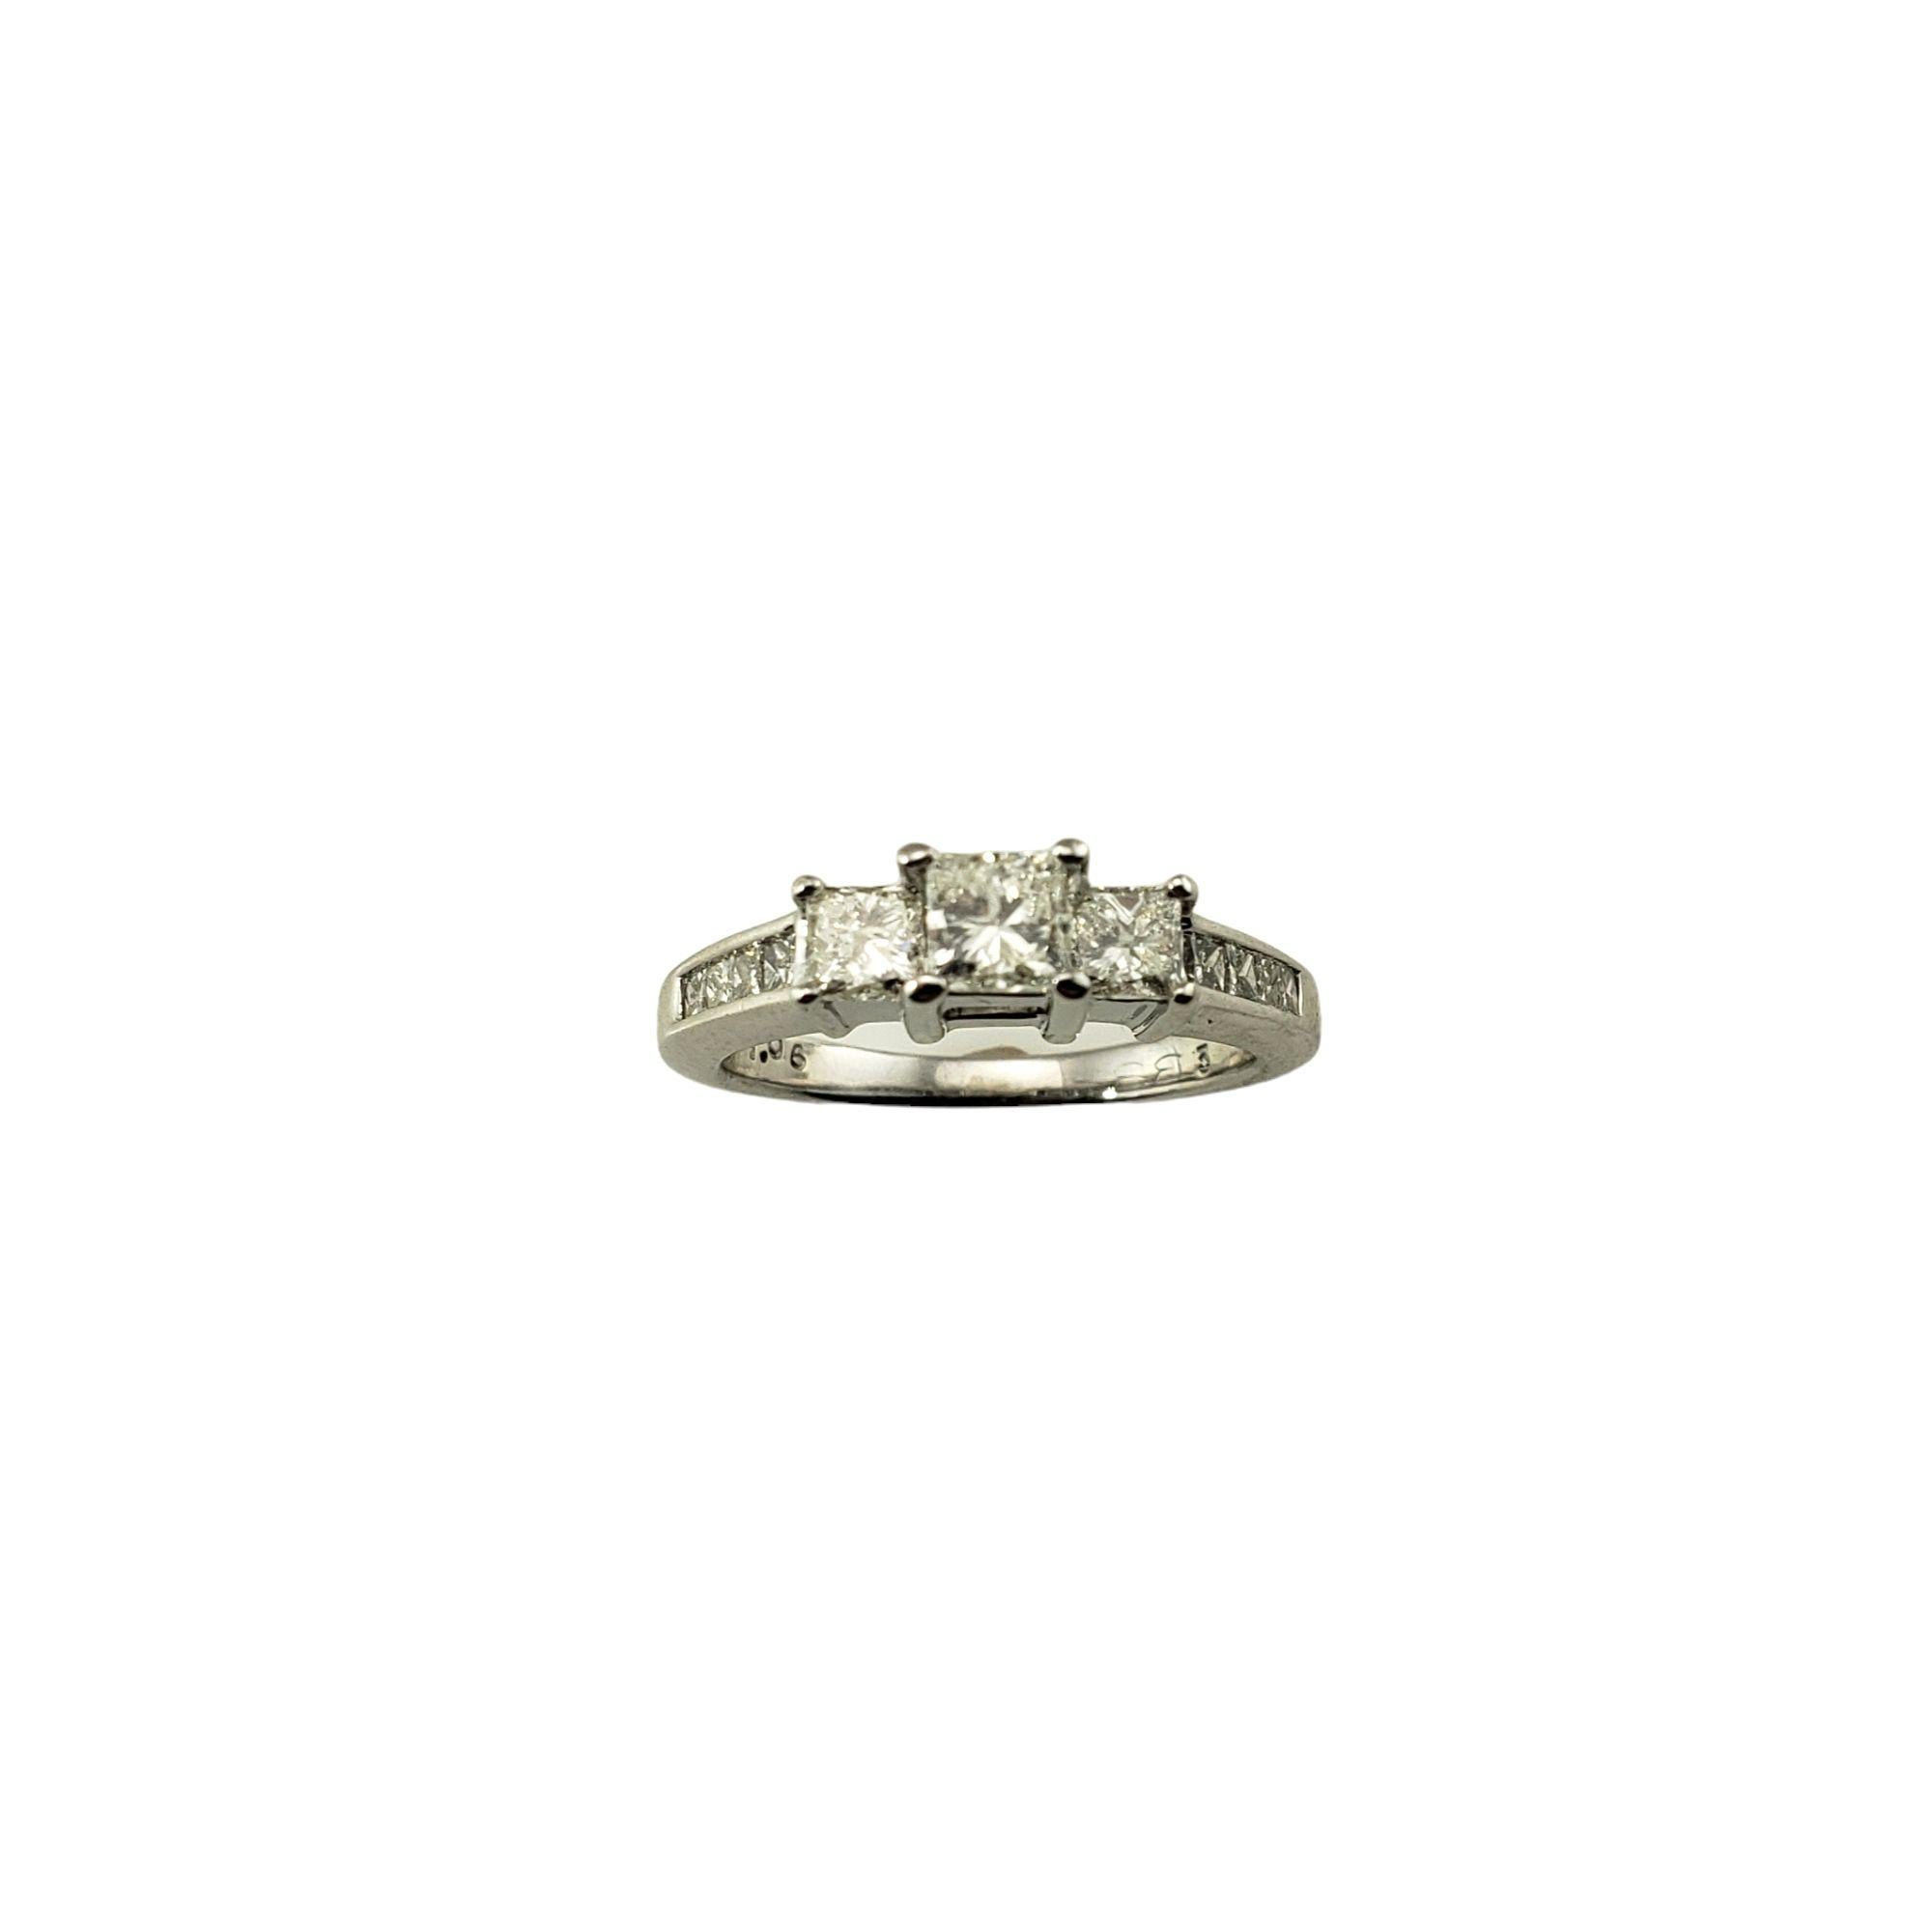 4.25 ring size